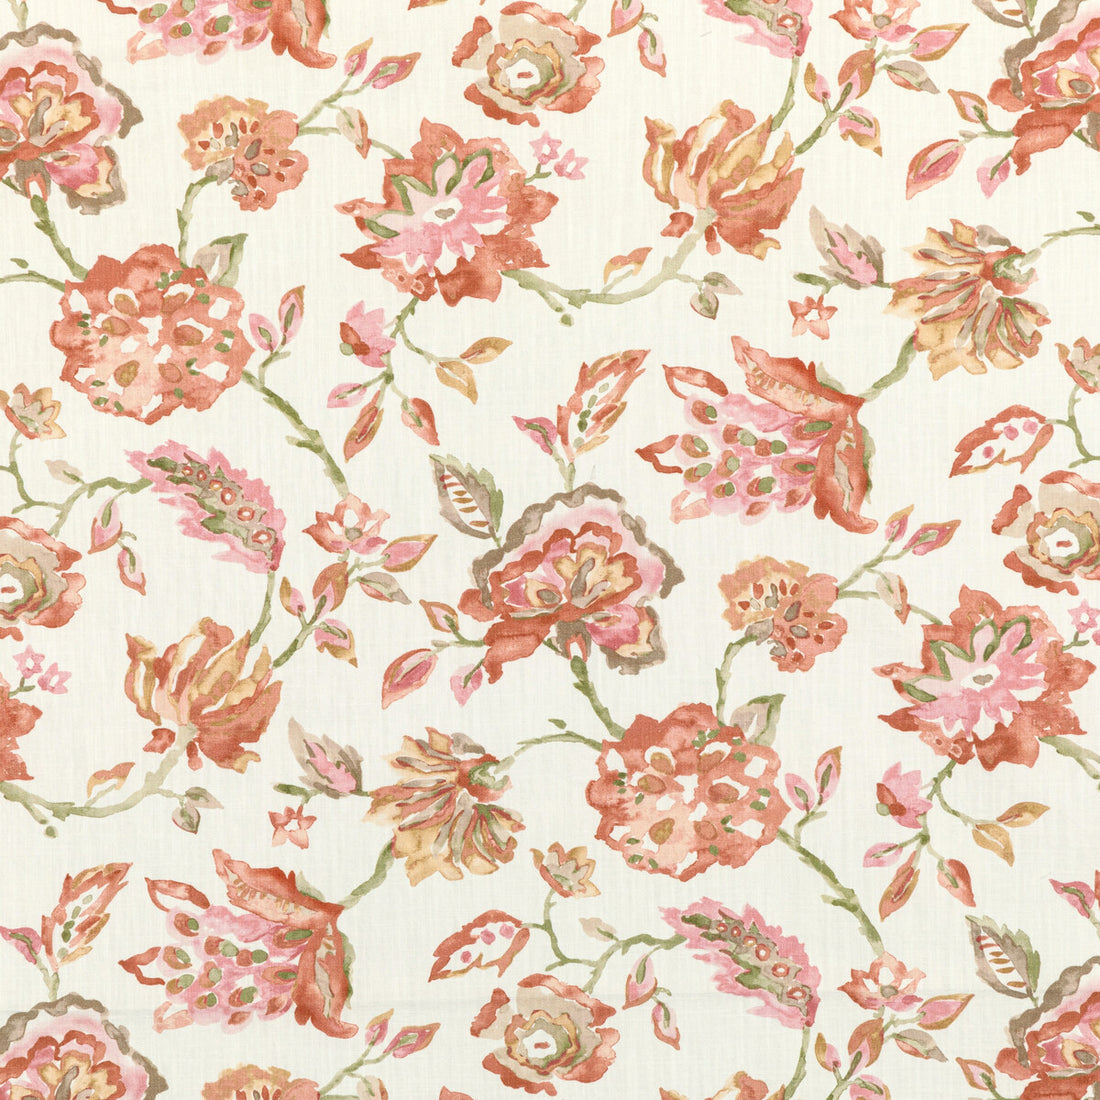 Etheria fabric in camelia color - pattern ETHERIA.12.0 - by Kravet Basics in the Monterey collection